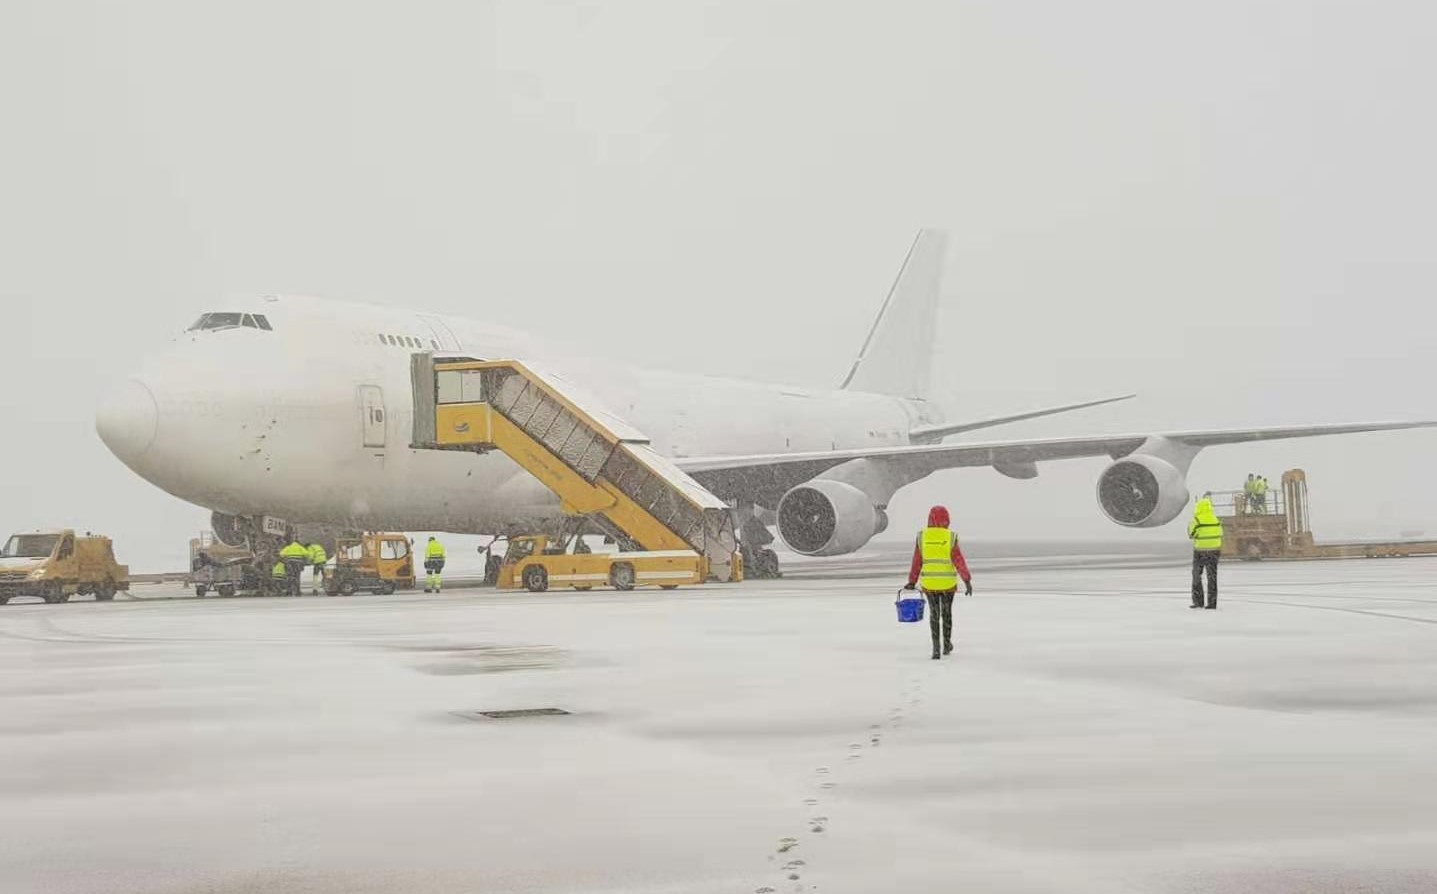 aircraft in snow at airport with yellow stairs